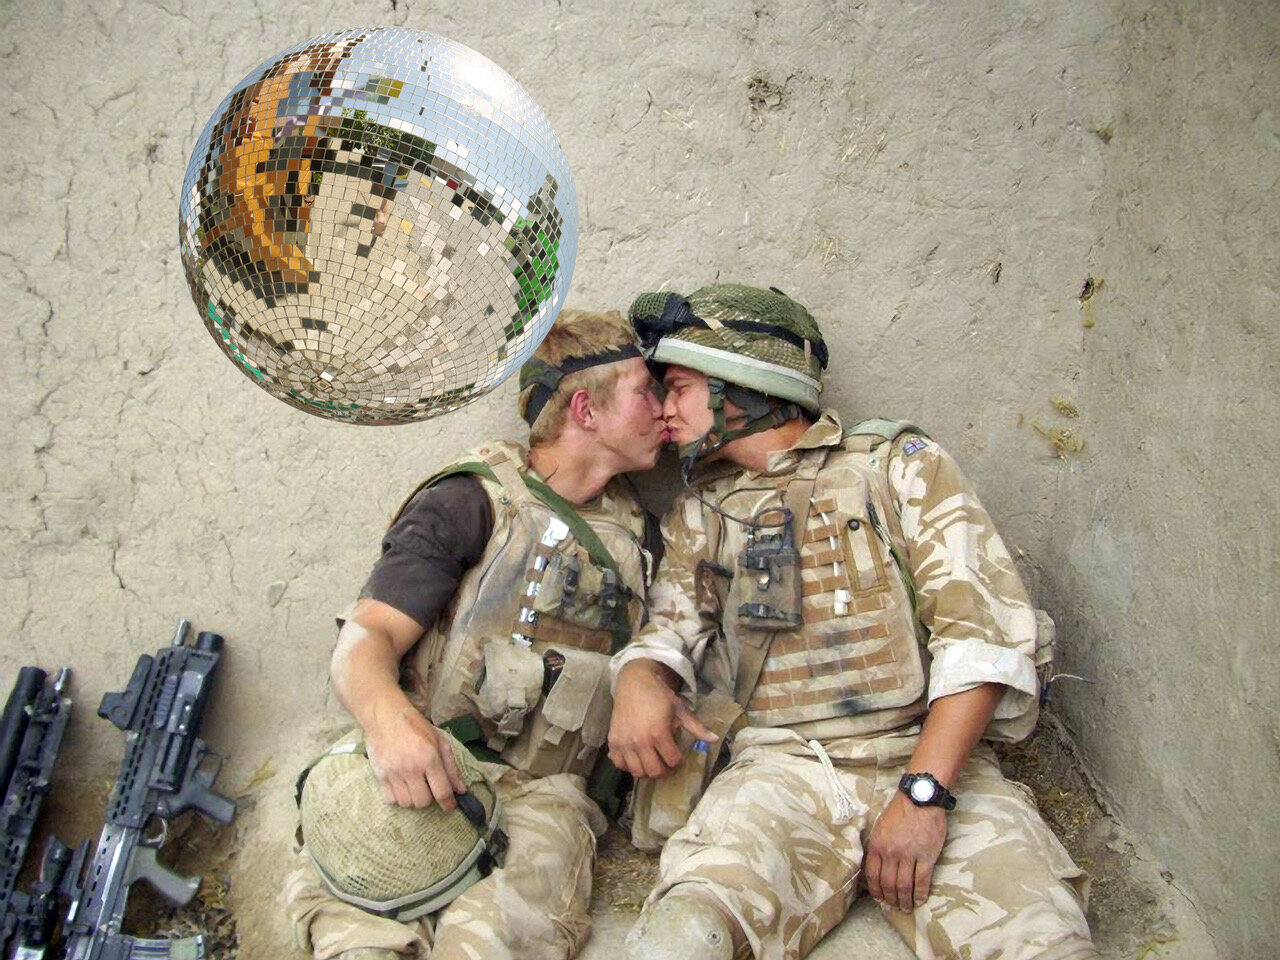  Bradley Wester  Kiss,  2013   Disco Interventions/Queering the Military Series   Digital archival print 18 x 22 1/2 inches   Edition 1/6    